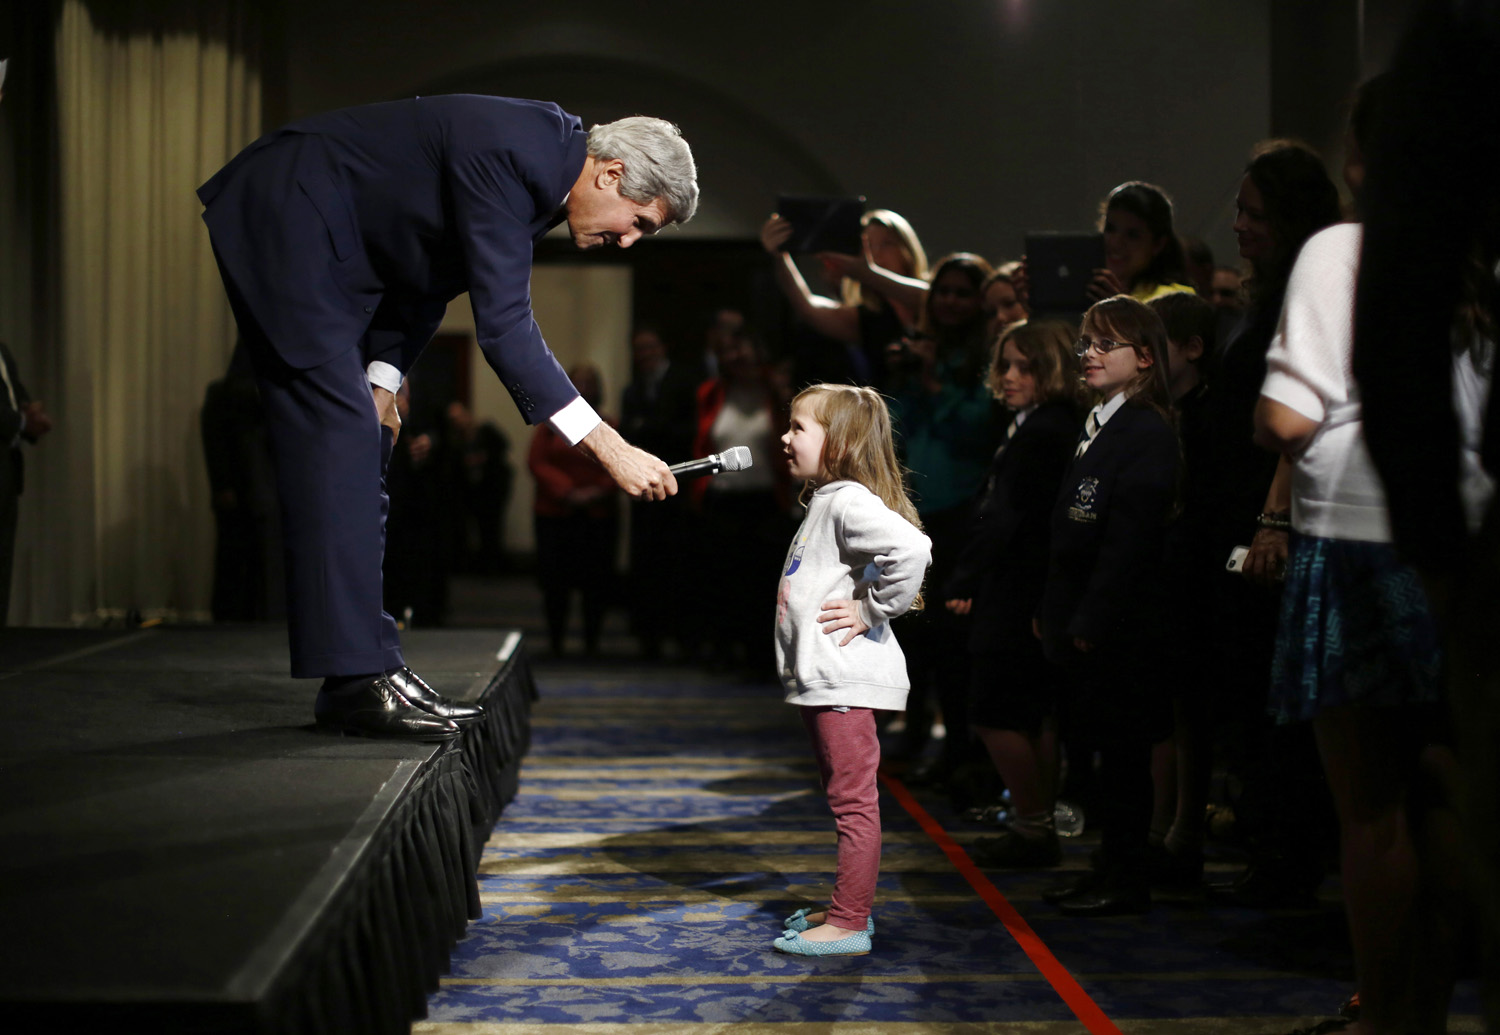 U.S. Secretary of State John Kerry speaks with five-year-old Dara Edwards, the daughter of an American staffer at the U.S. Consulate in Sydney, as he meets embassy and consular staff in Sydney on August 12, 2014.